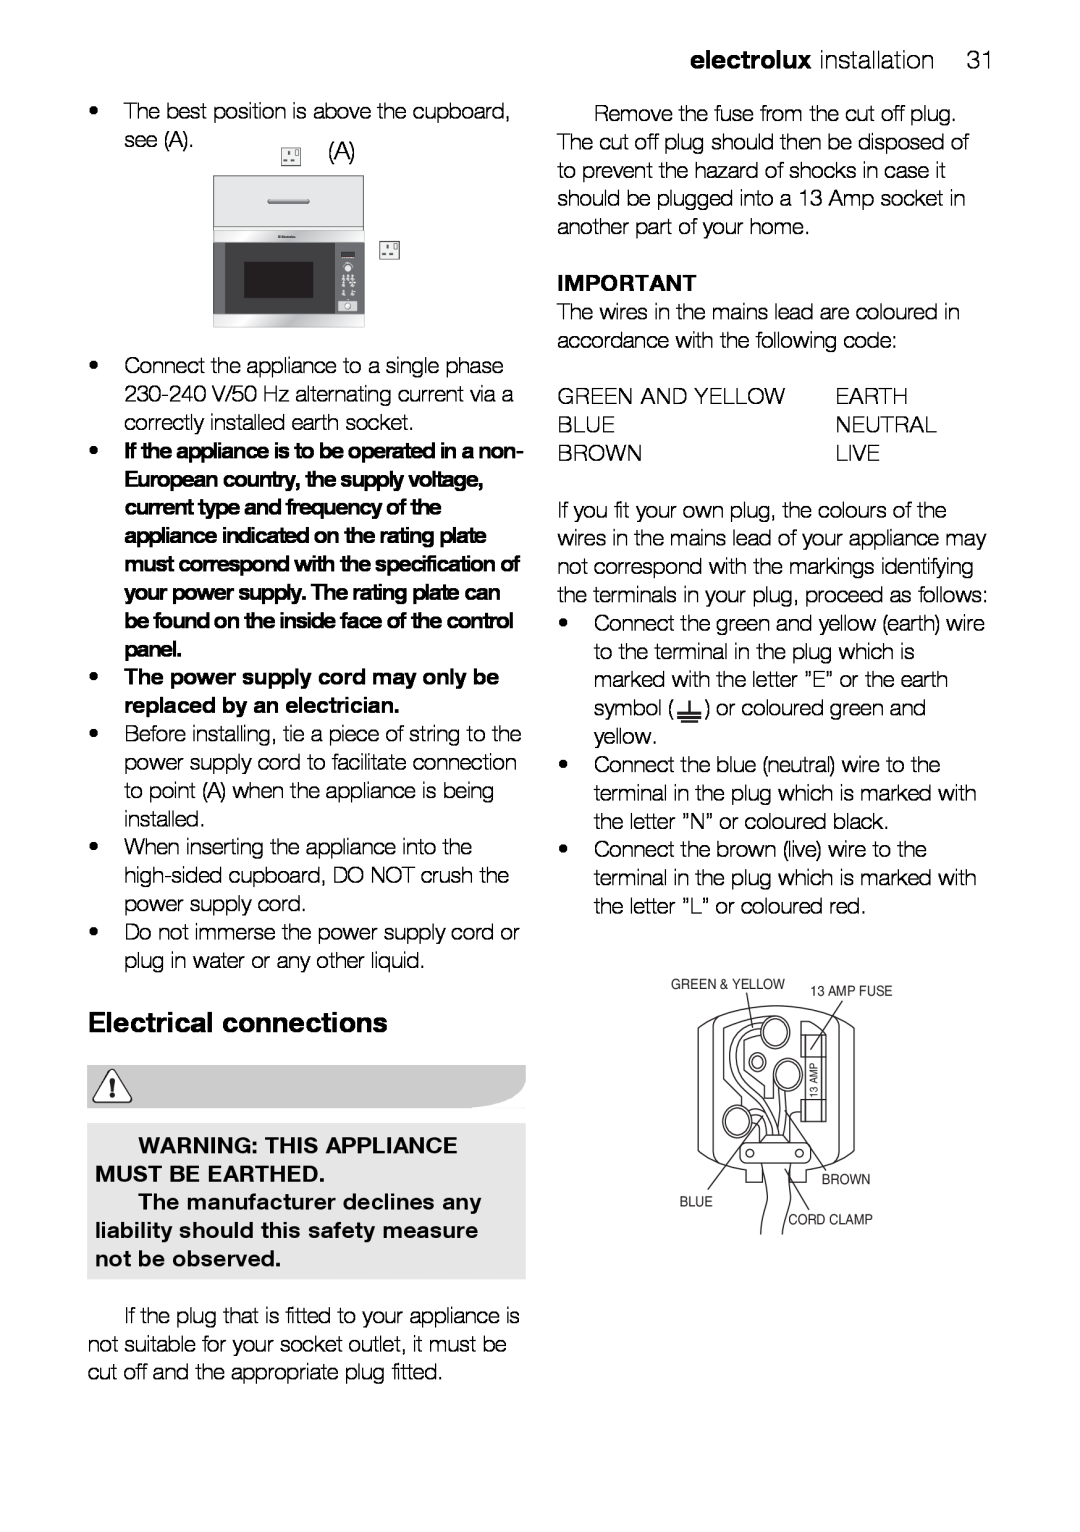 Electrolux EMS26415 user manual Electrical connections, electrolux installation, Warning This Appliance Must Be Earthed 